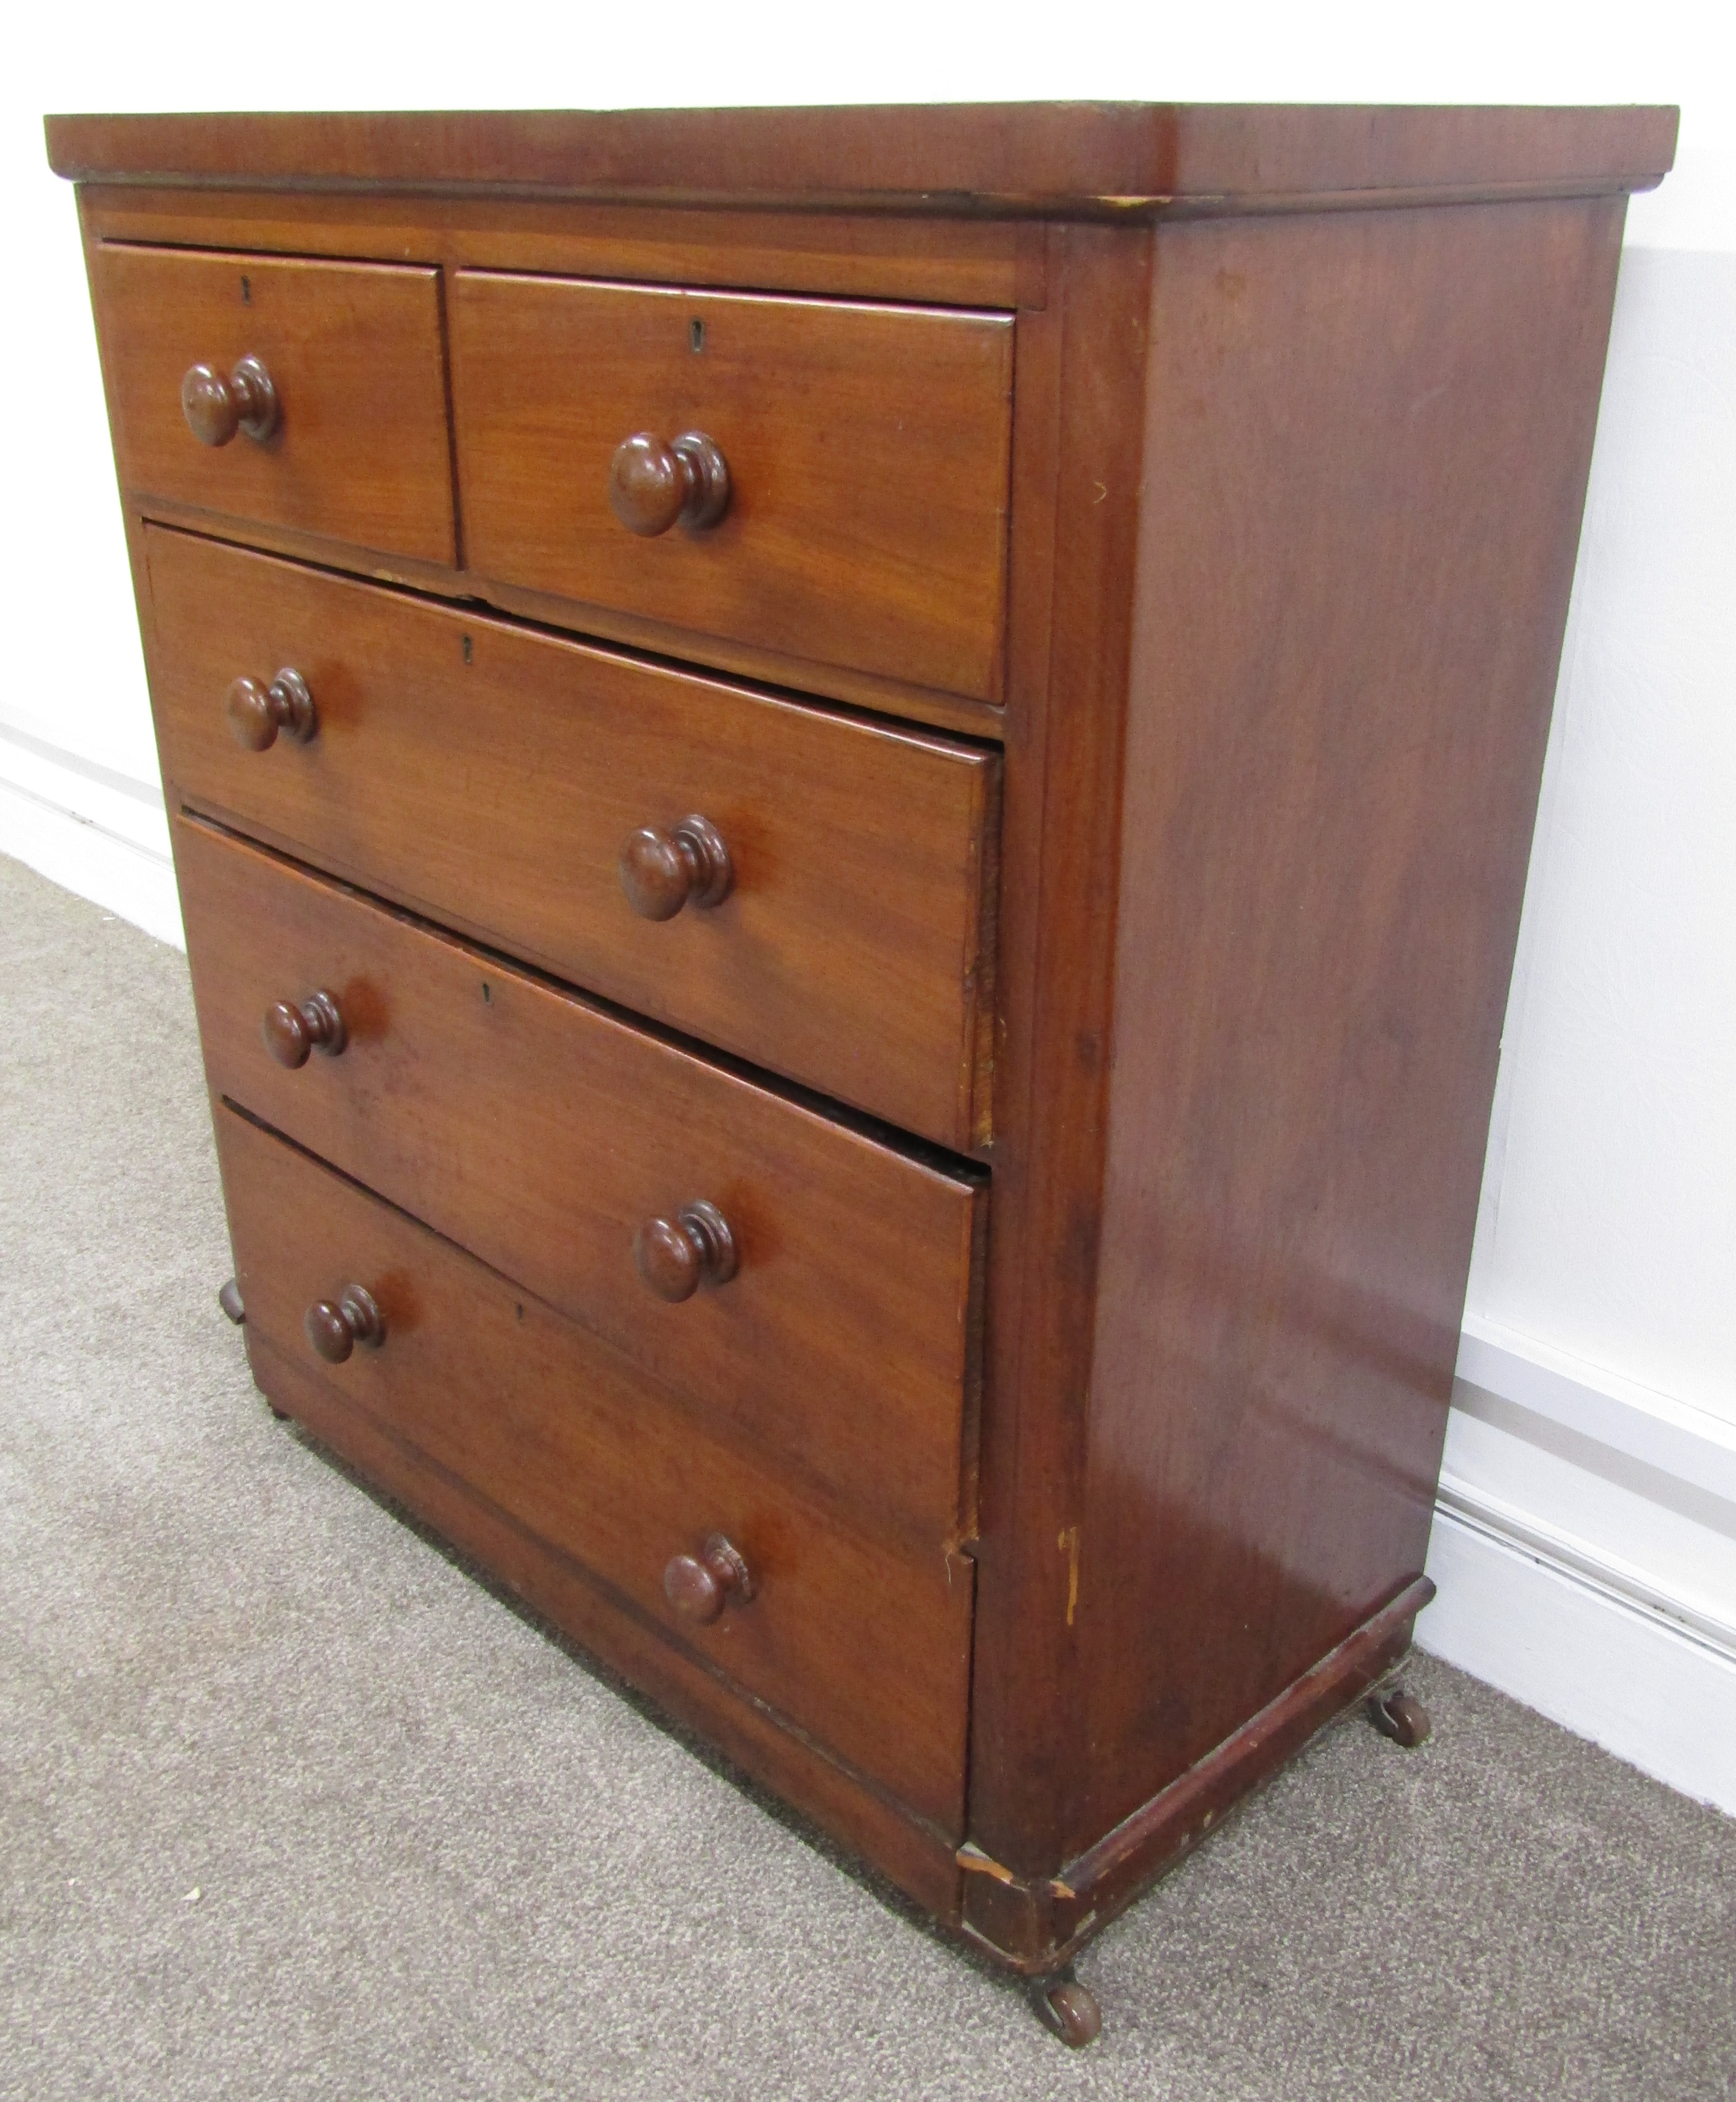 Victorian mahogany chest of drawers - approx. L 98.5cm x D 45cm x H 108cm - Image 3 of 4